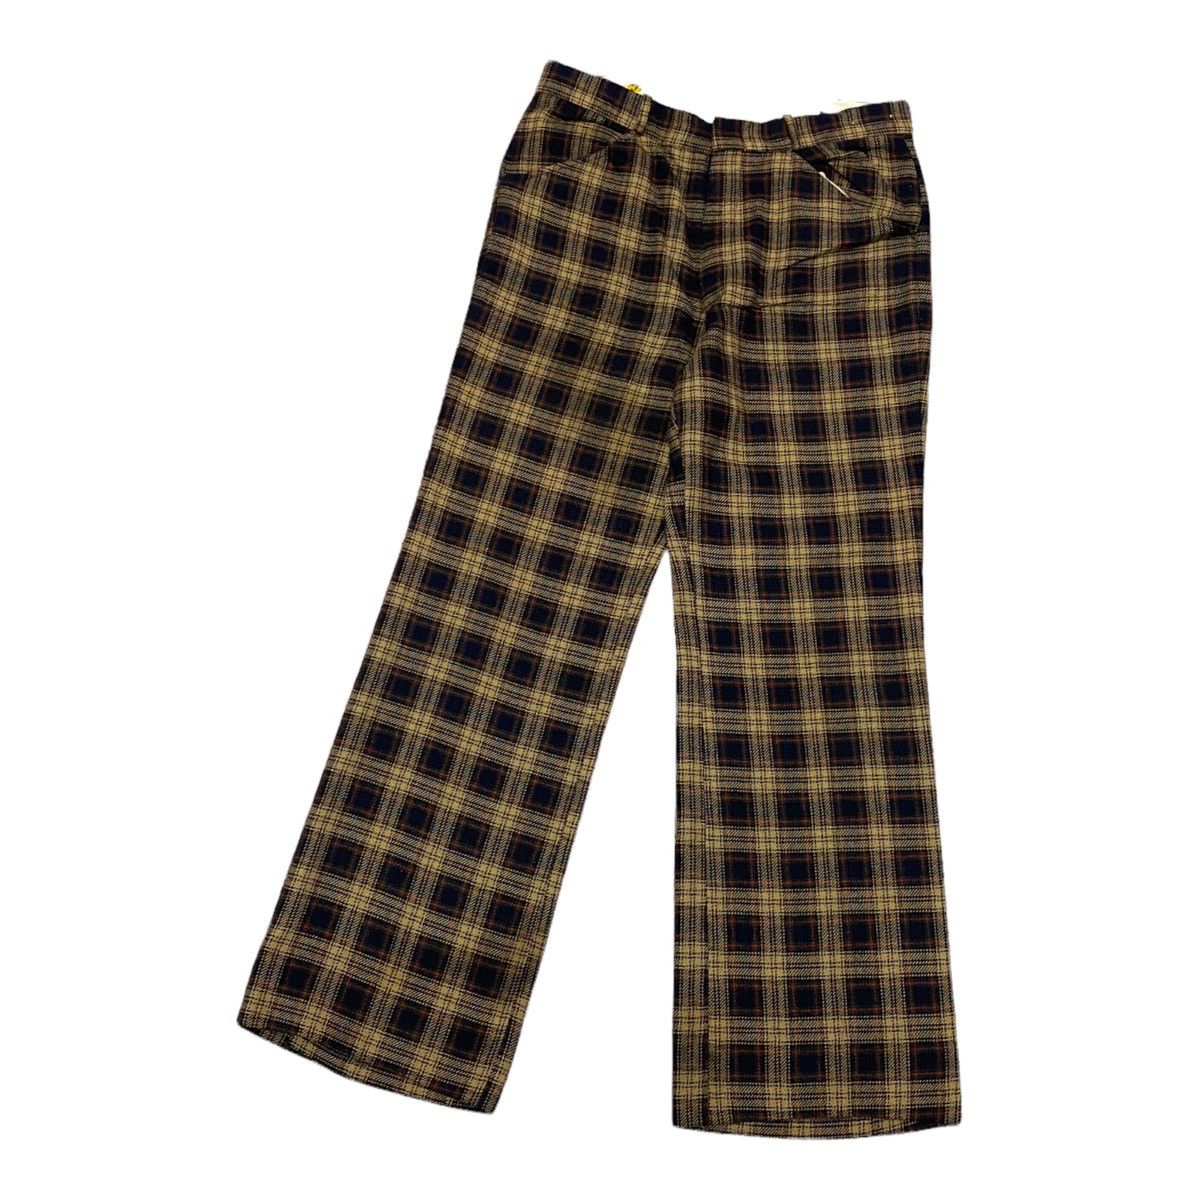 Archival Clothing - 🔥FARAH AW1998 CHECKED PLAID WOOL PANTS MADE IN ITALY - 5